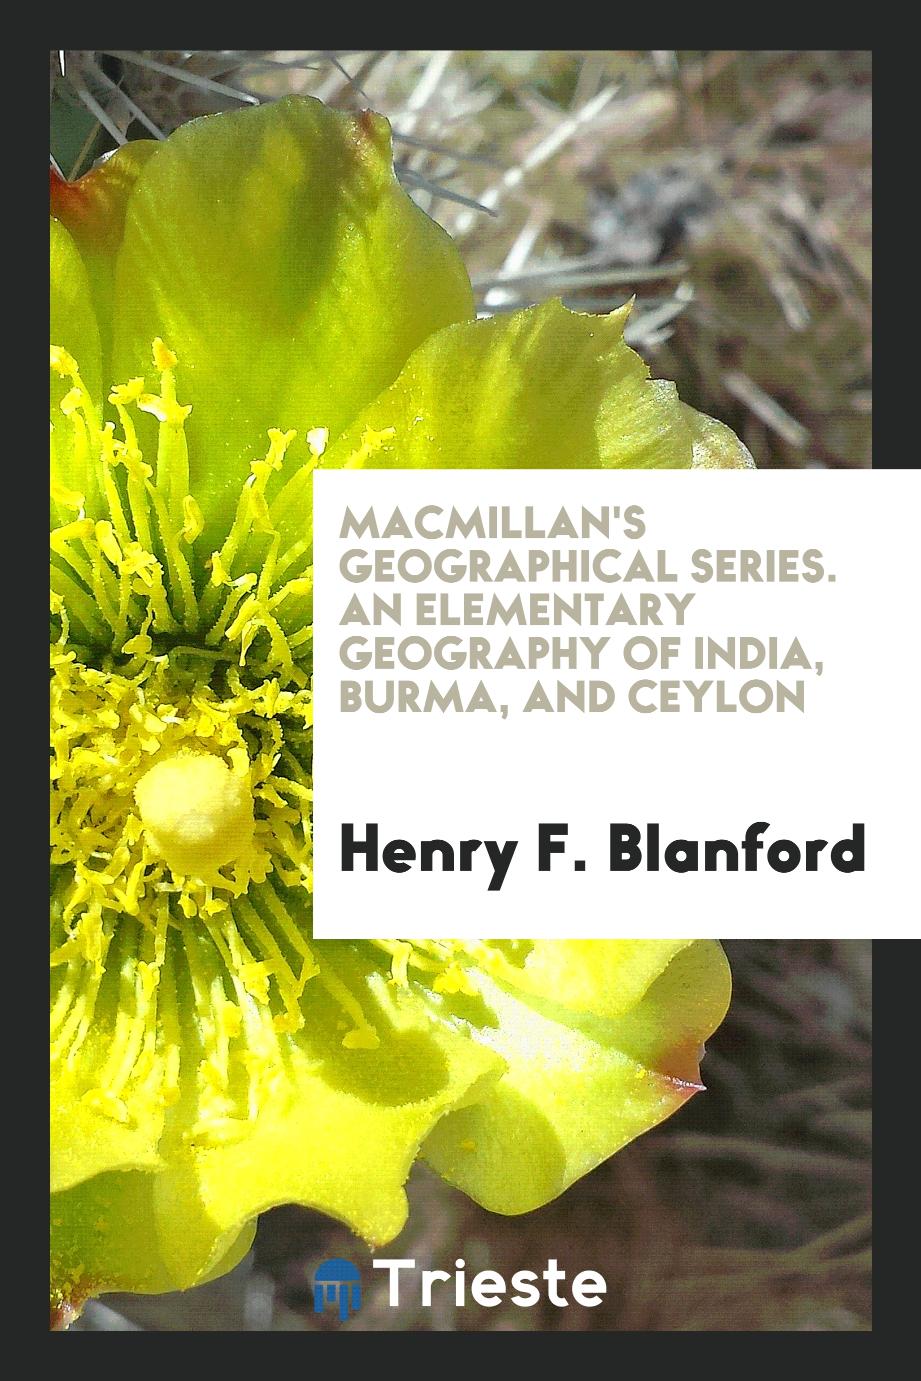 Macmillan's Geographical Series. An Elementary Geography of India, Burma, and Ceylon